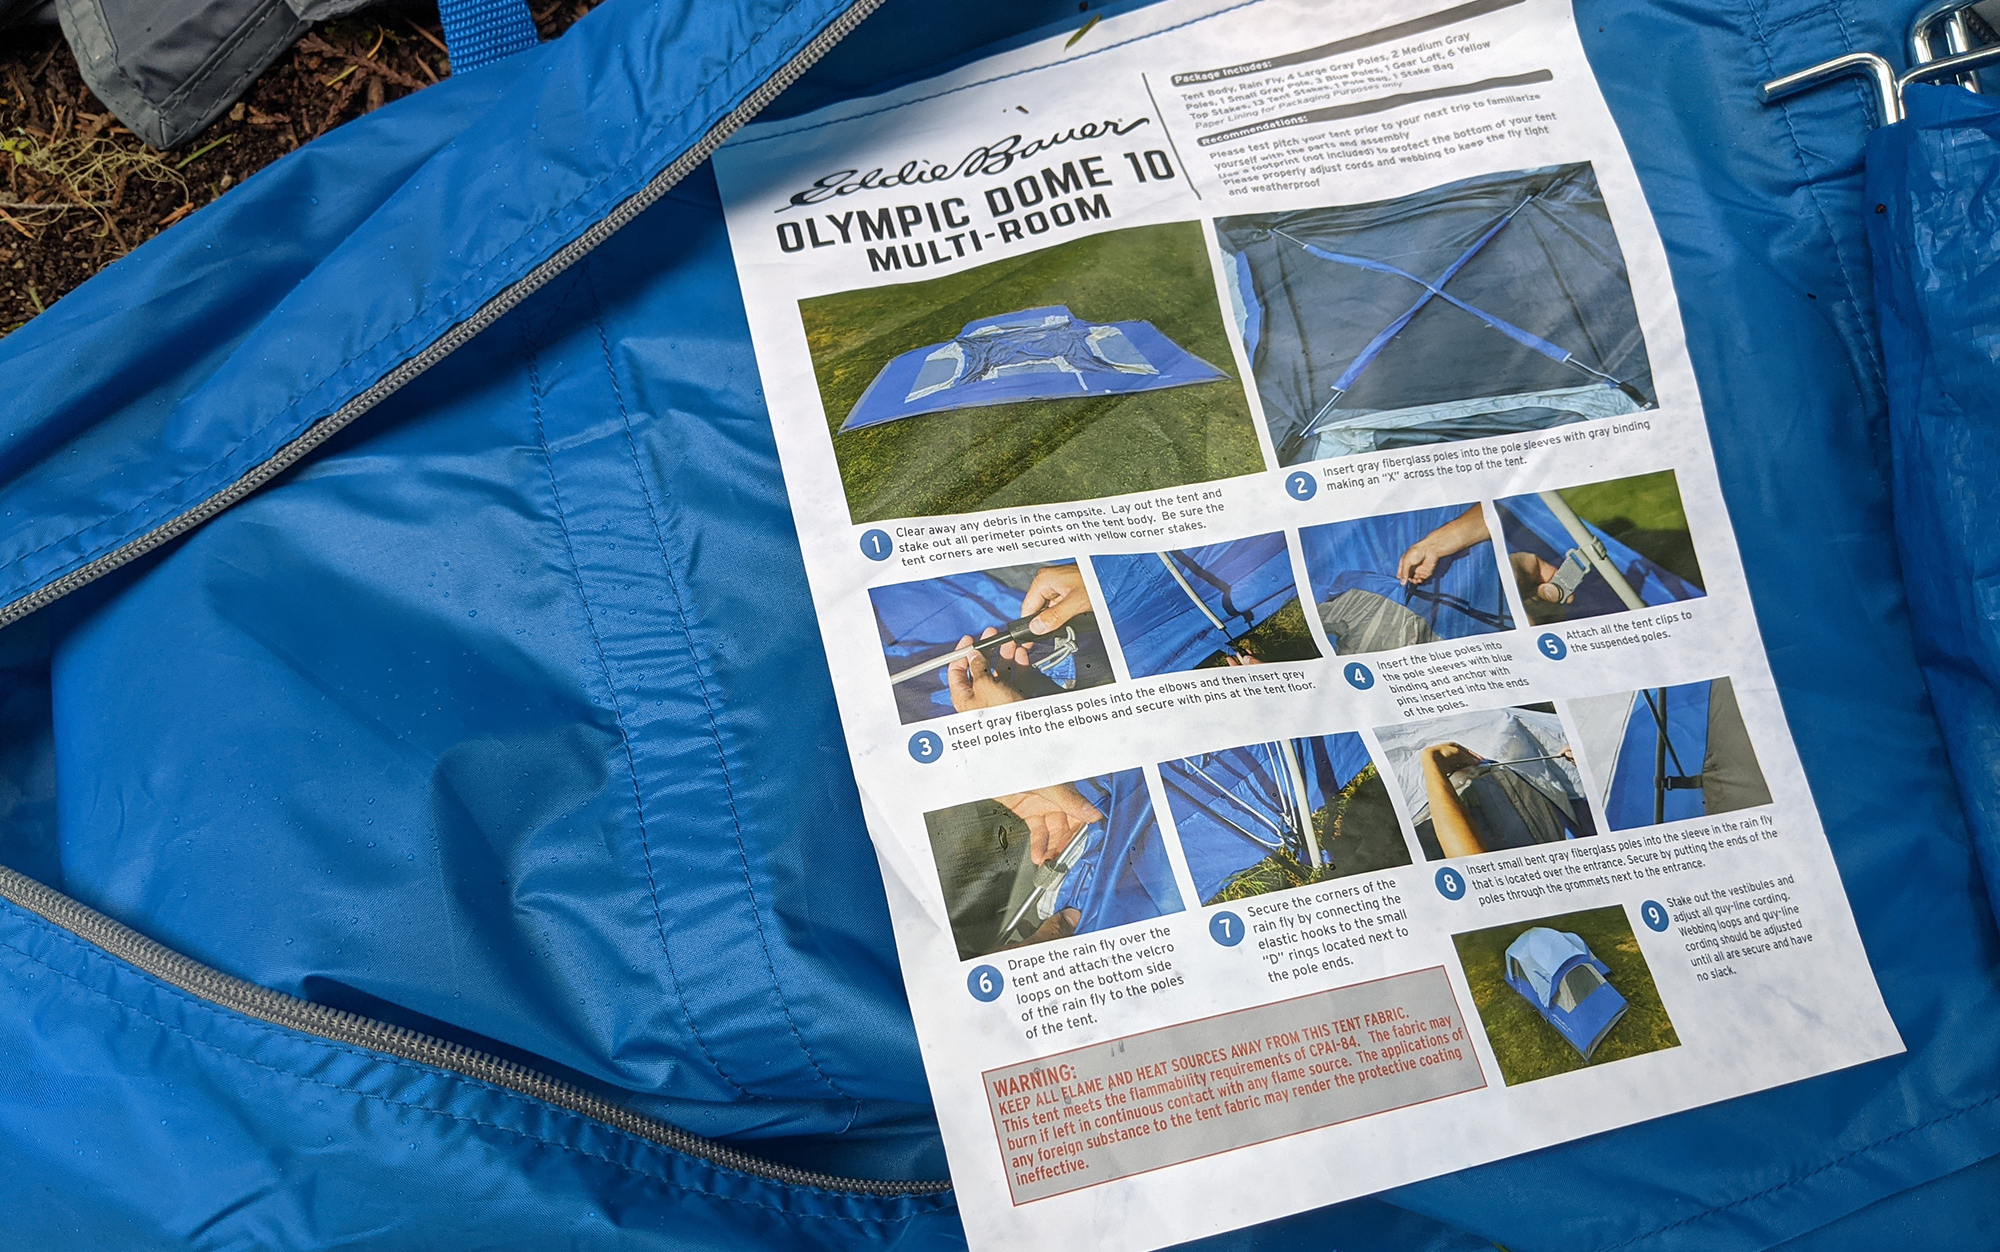 Eddie Bauer's tent includes detailed instructions.